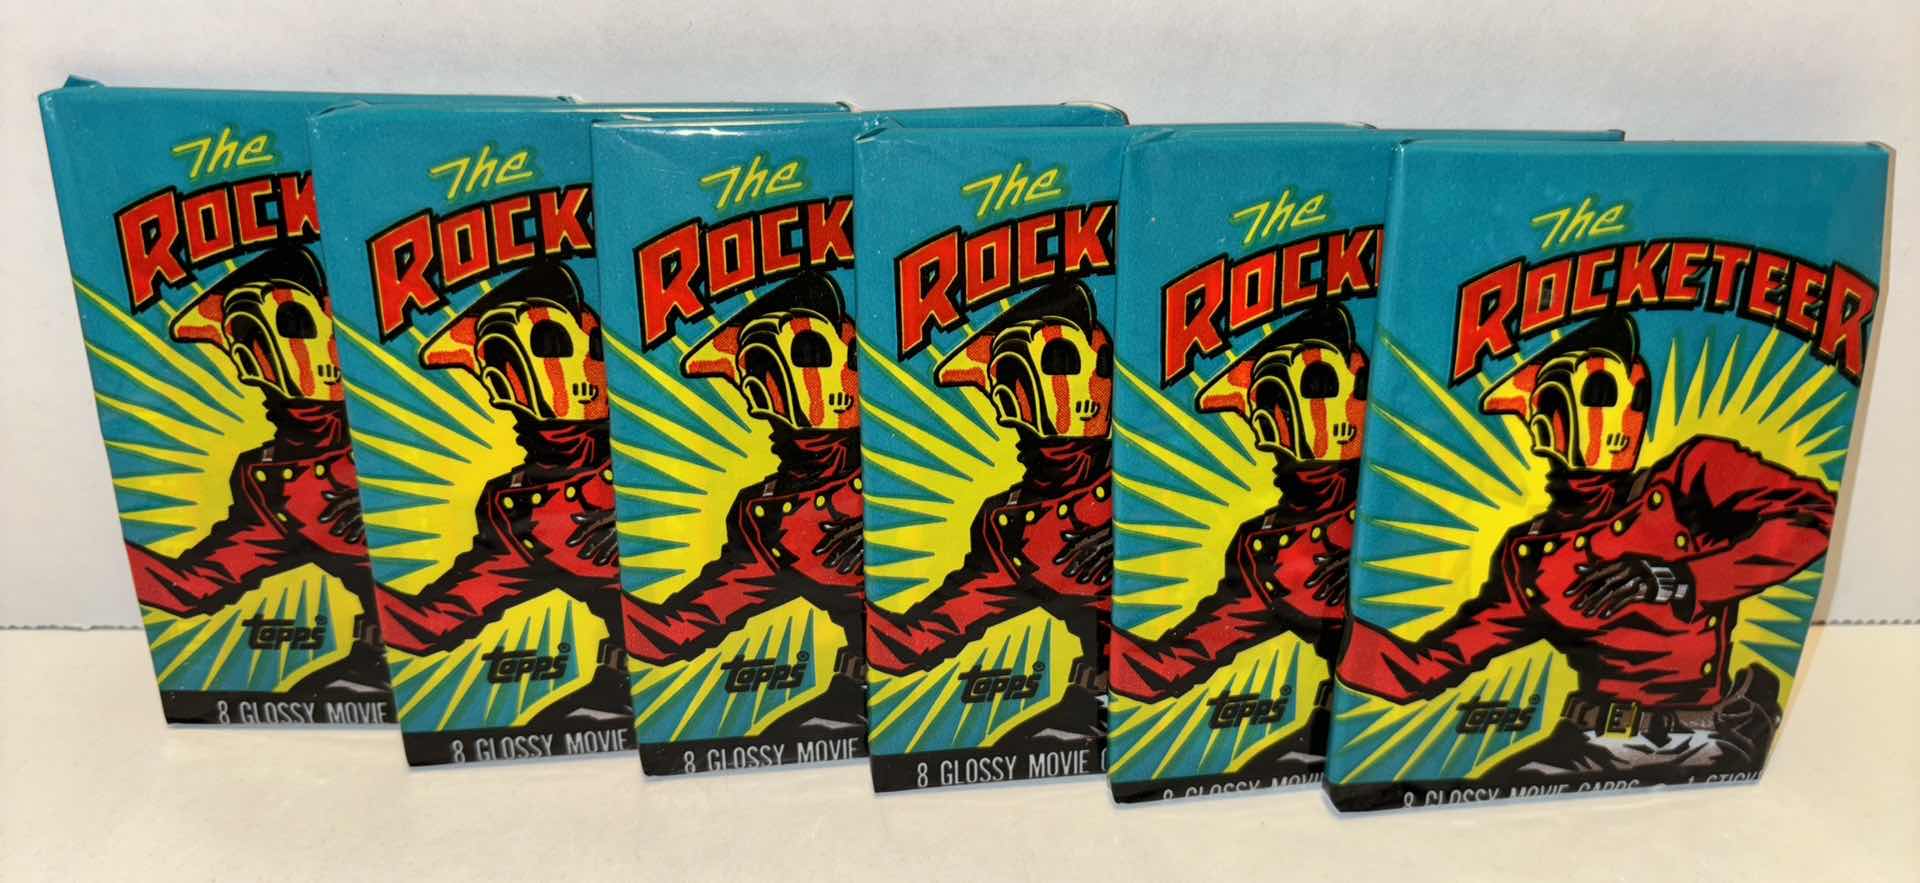 Photo 1 of NEW 6-PACK VINTAGE TOPPS 1991 COLLECTIBLE TRADING CARDS, 8 CT GLOSSY MOVIE CARDS W STICKER, “OFFICIAL ROCKETEER MOVIE SOUVENIR MAGAZINE”